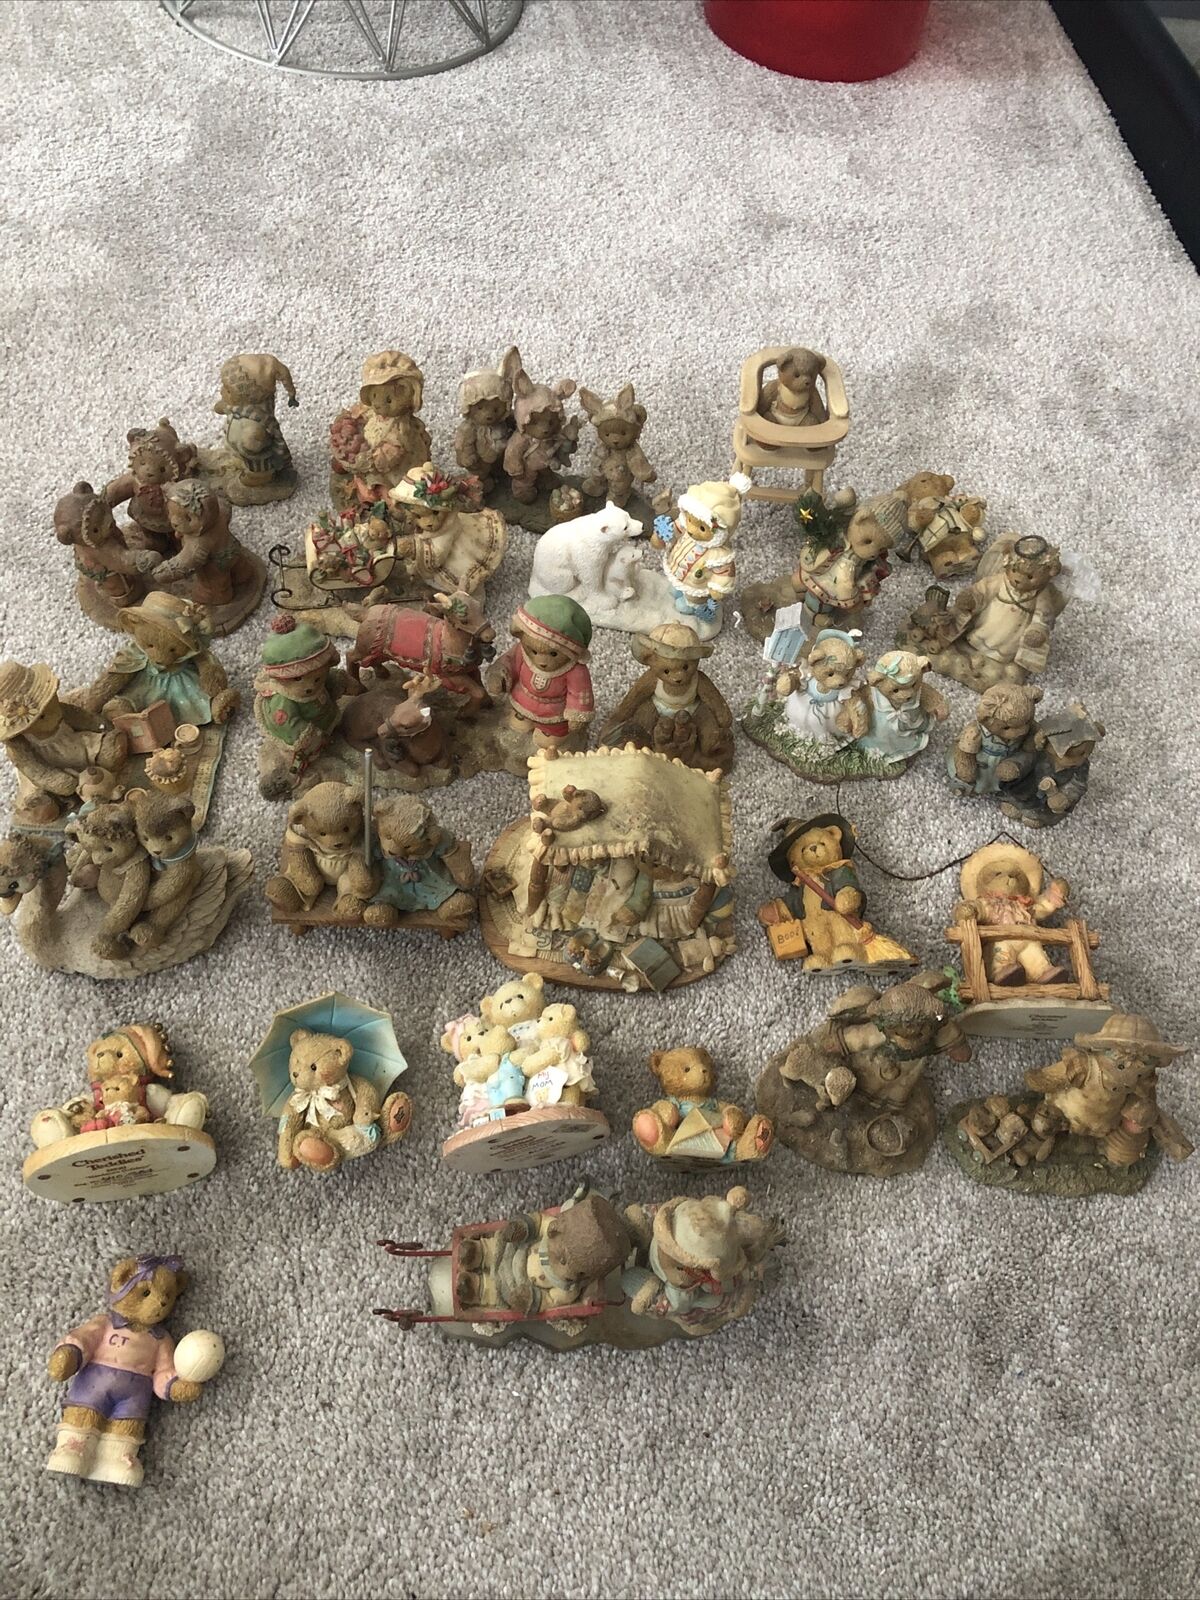 Cherished  figurine LOT of 28 USED Chipped Pieces Broken See Pics 3.11.24 Bag3